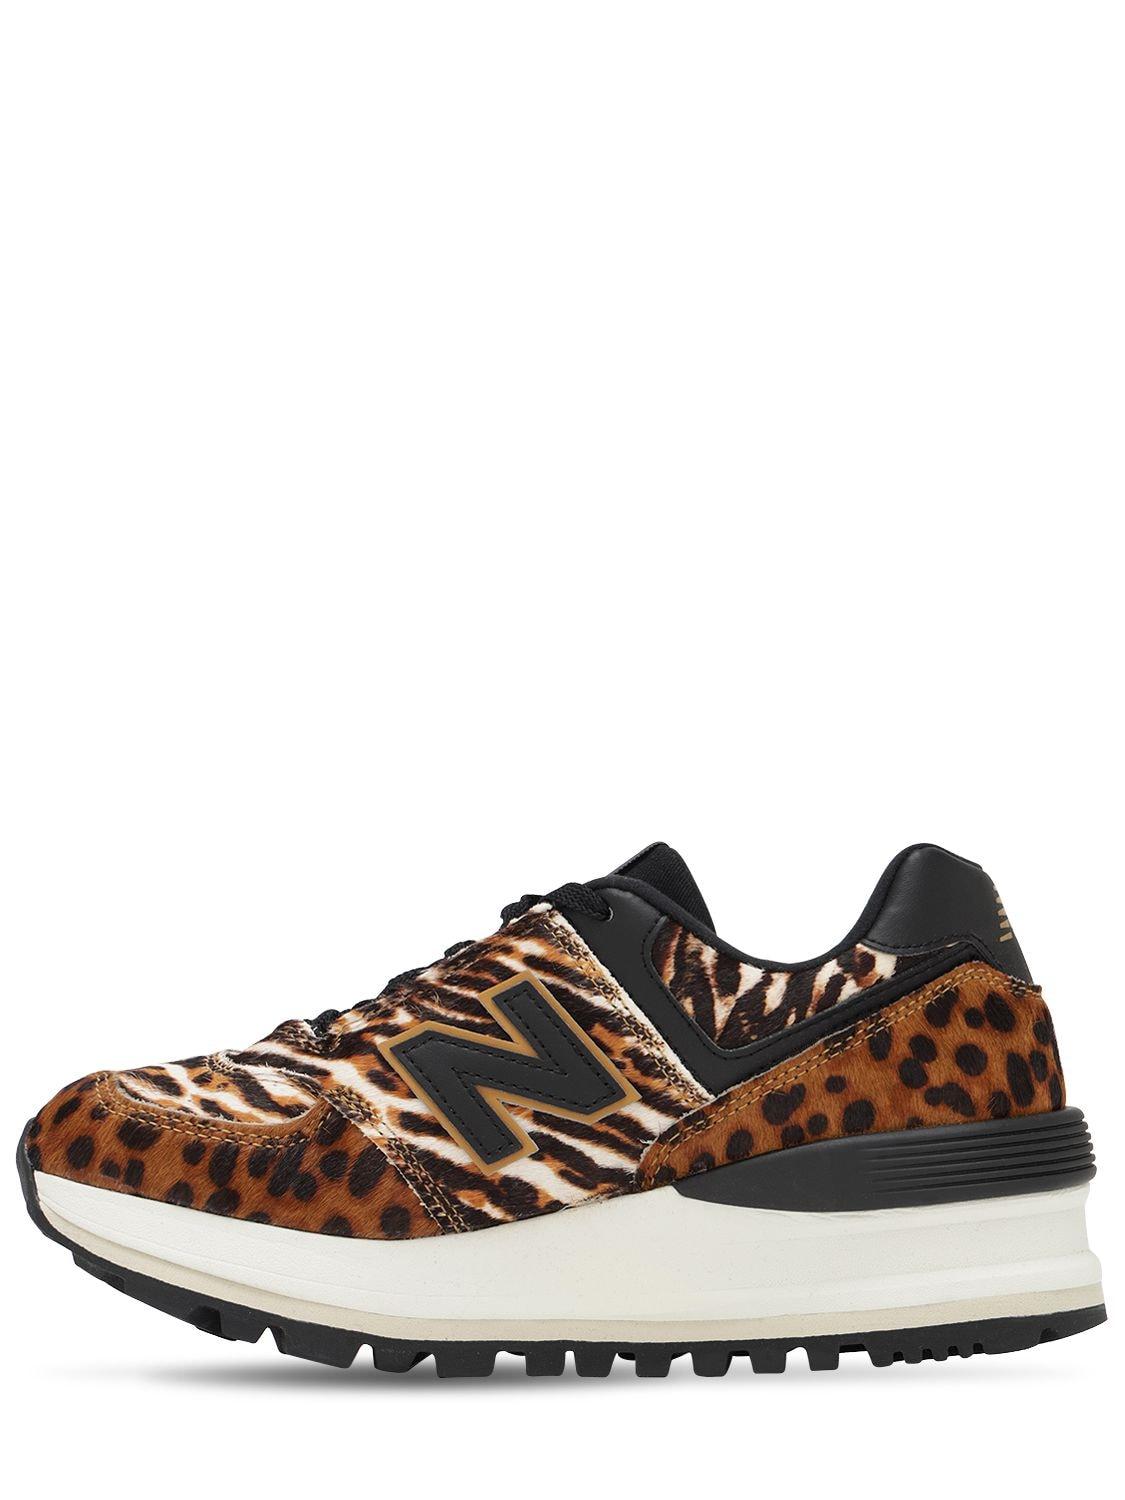 New Balance 574 Wedge in Leopard (Brown) | Lyst